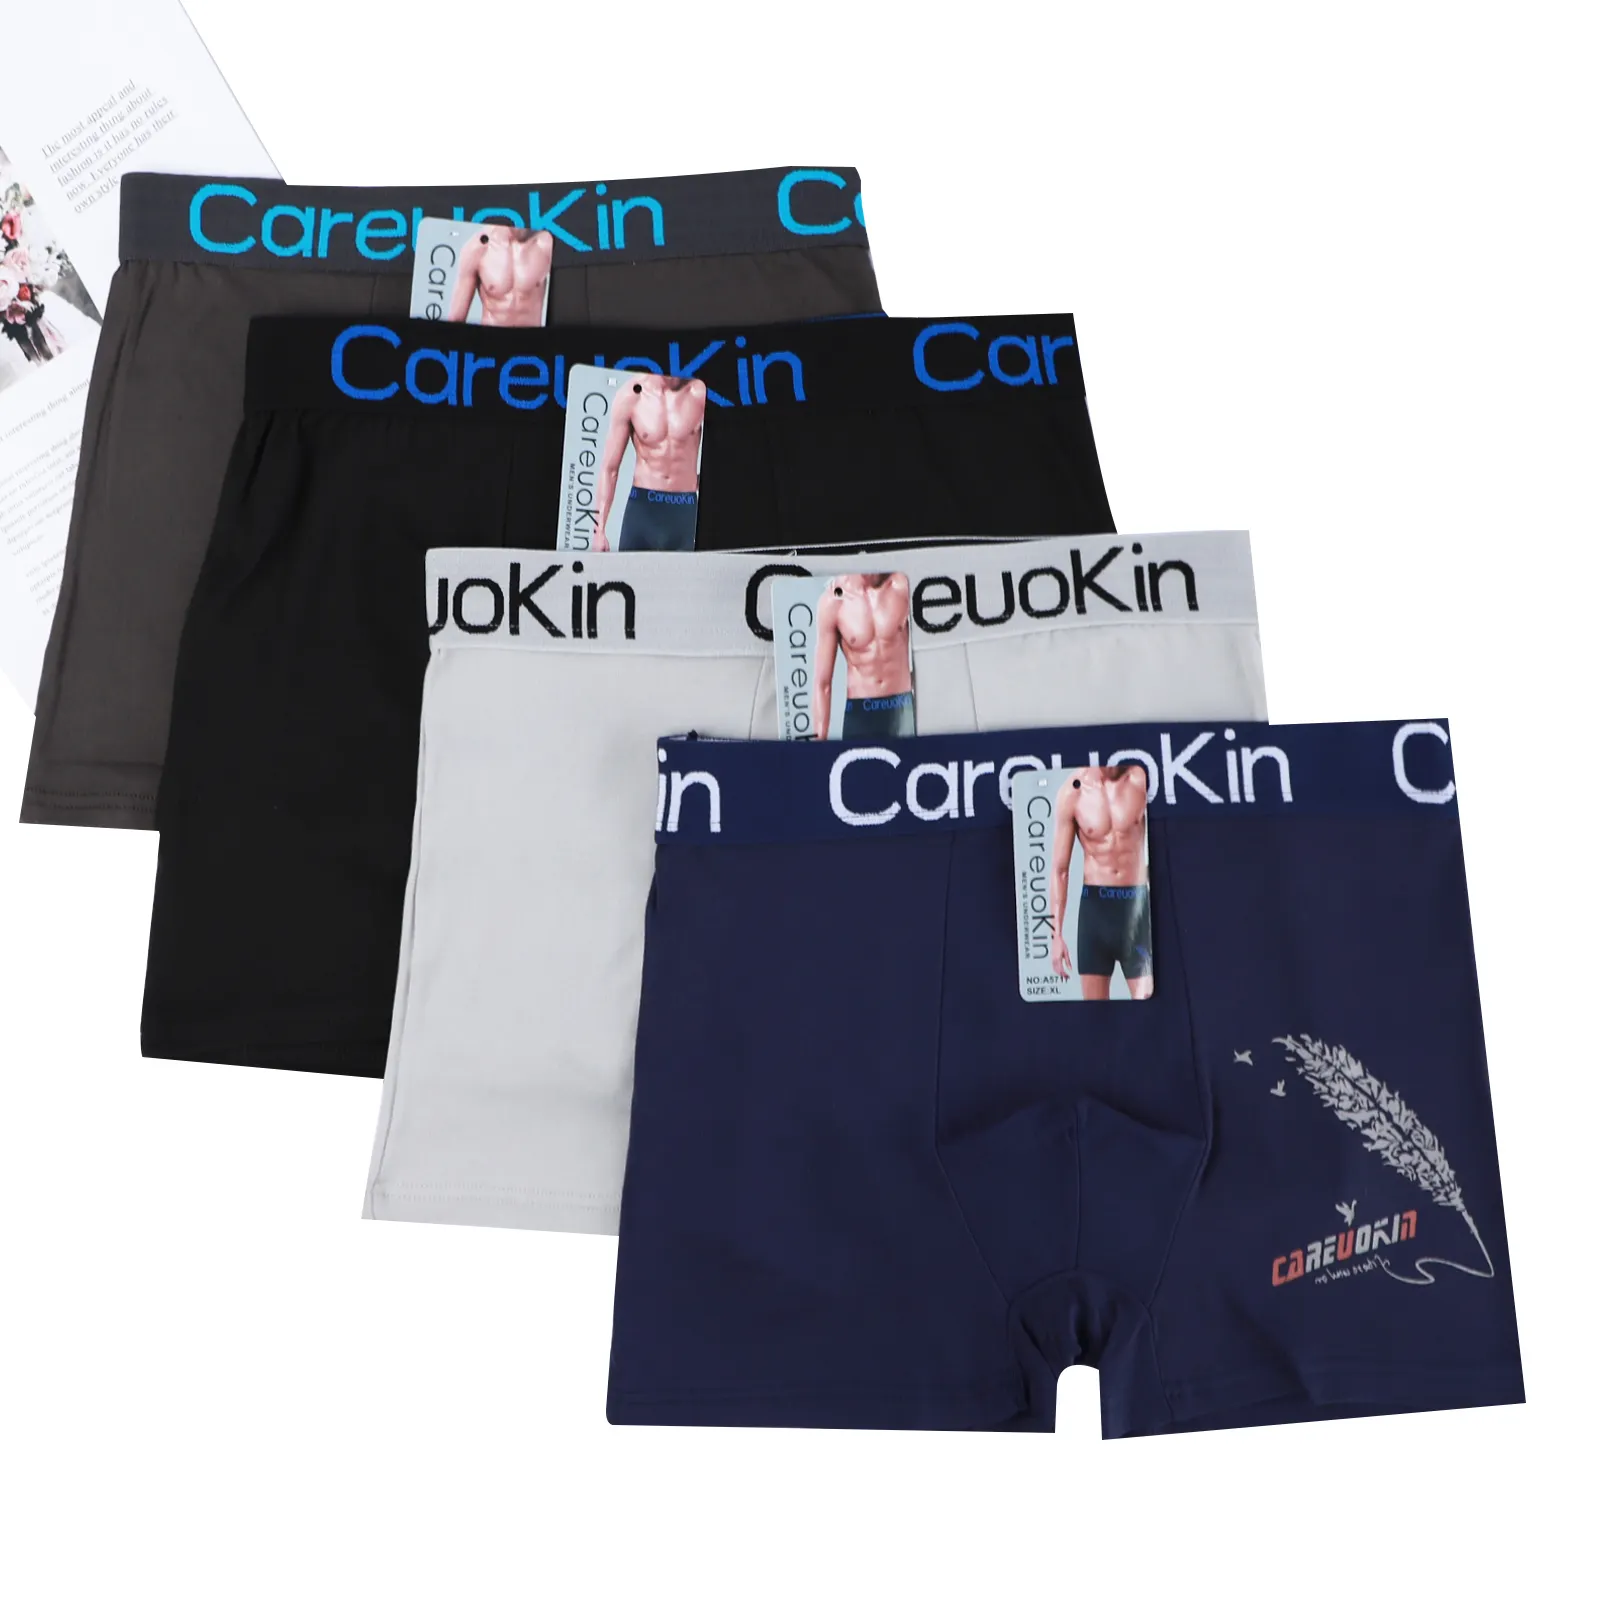 UOKIN Factory wholesale mens boxer briefs quality elastic waistband male underpants in Low MOQ price Careuokin A5717